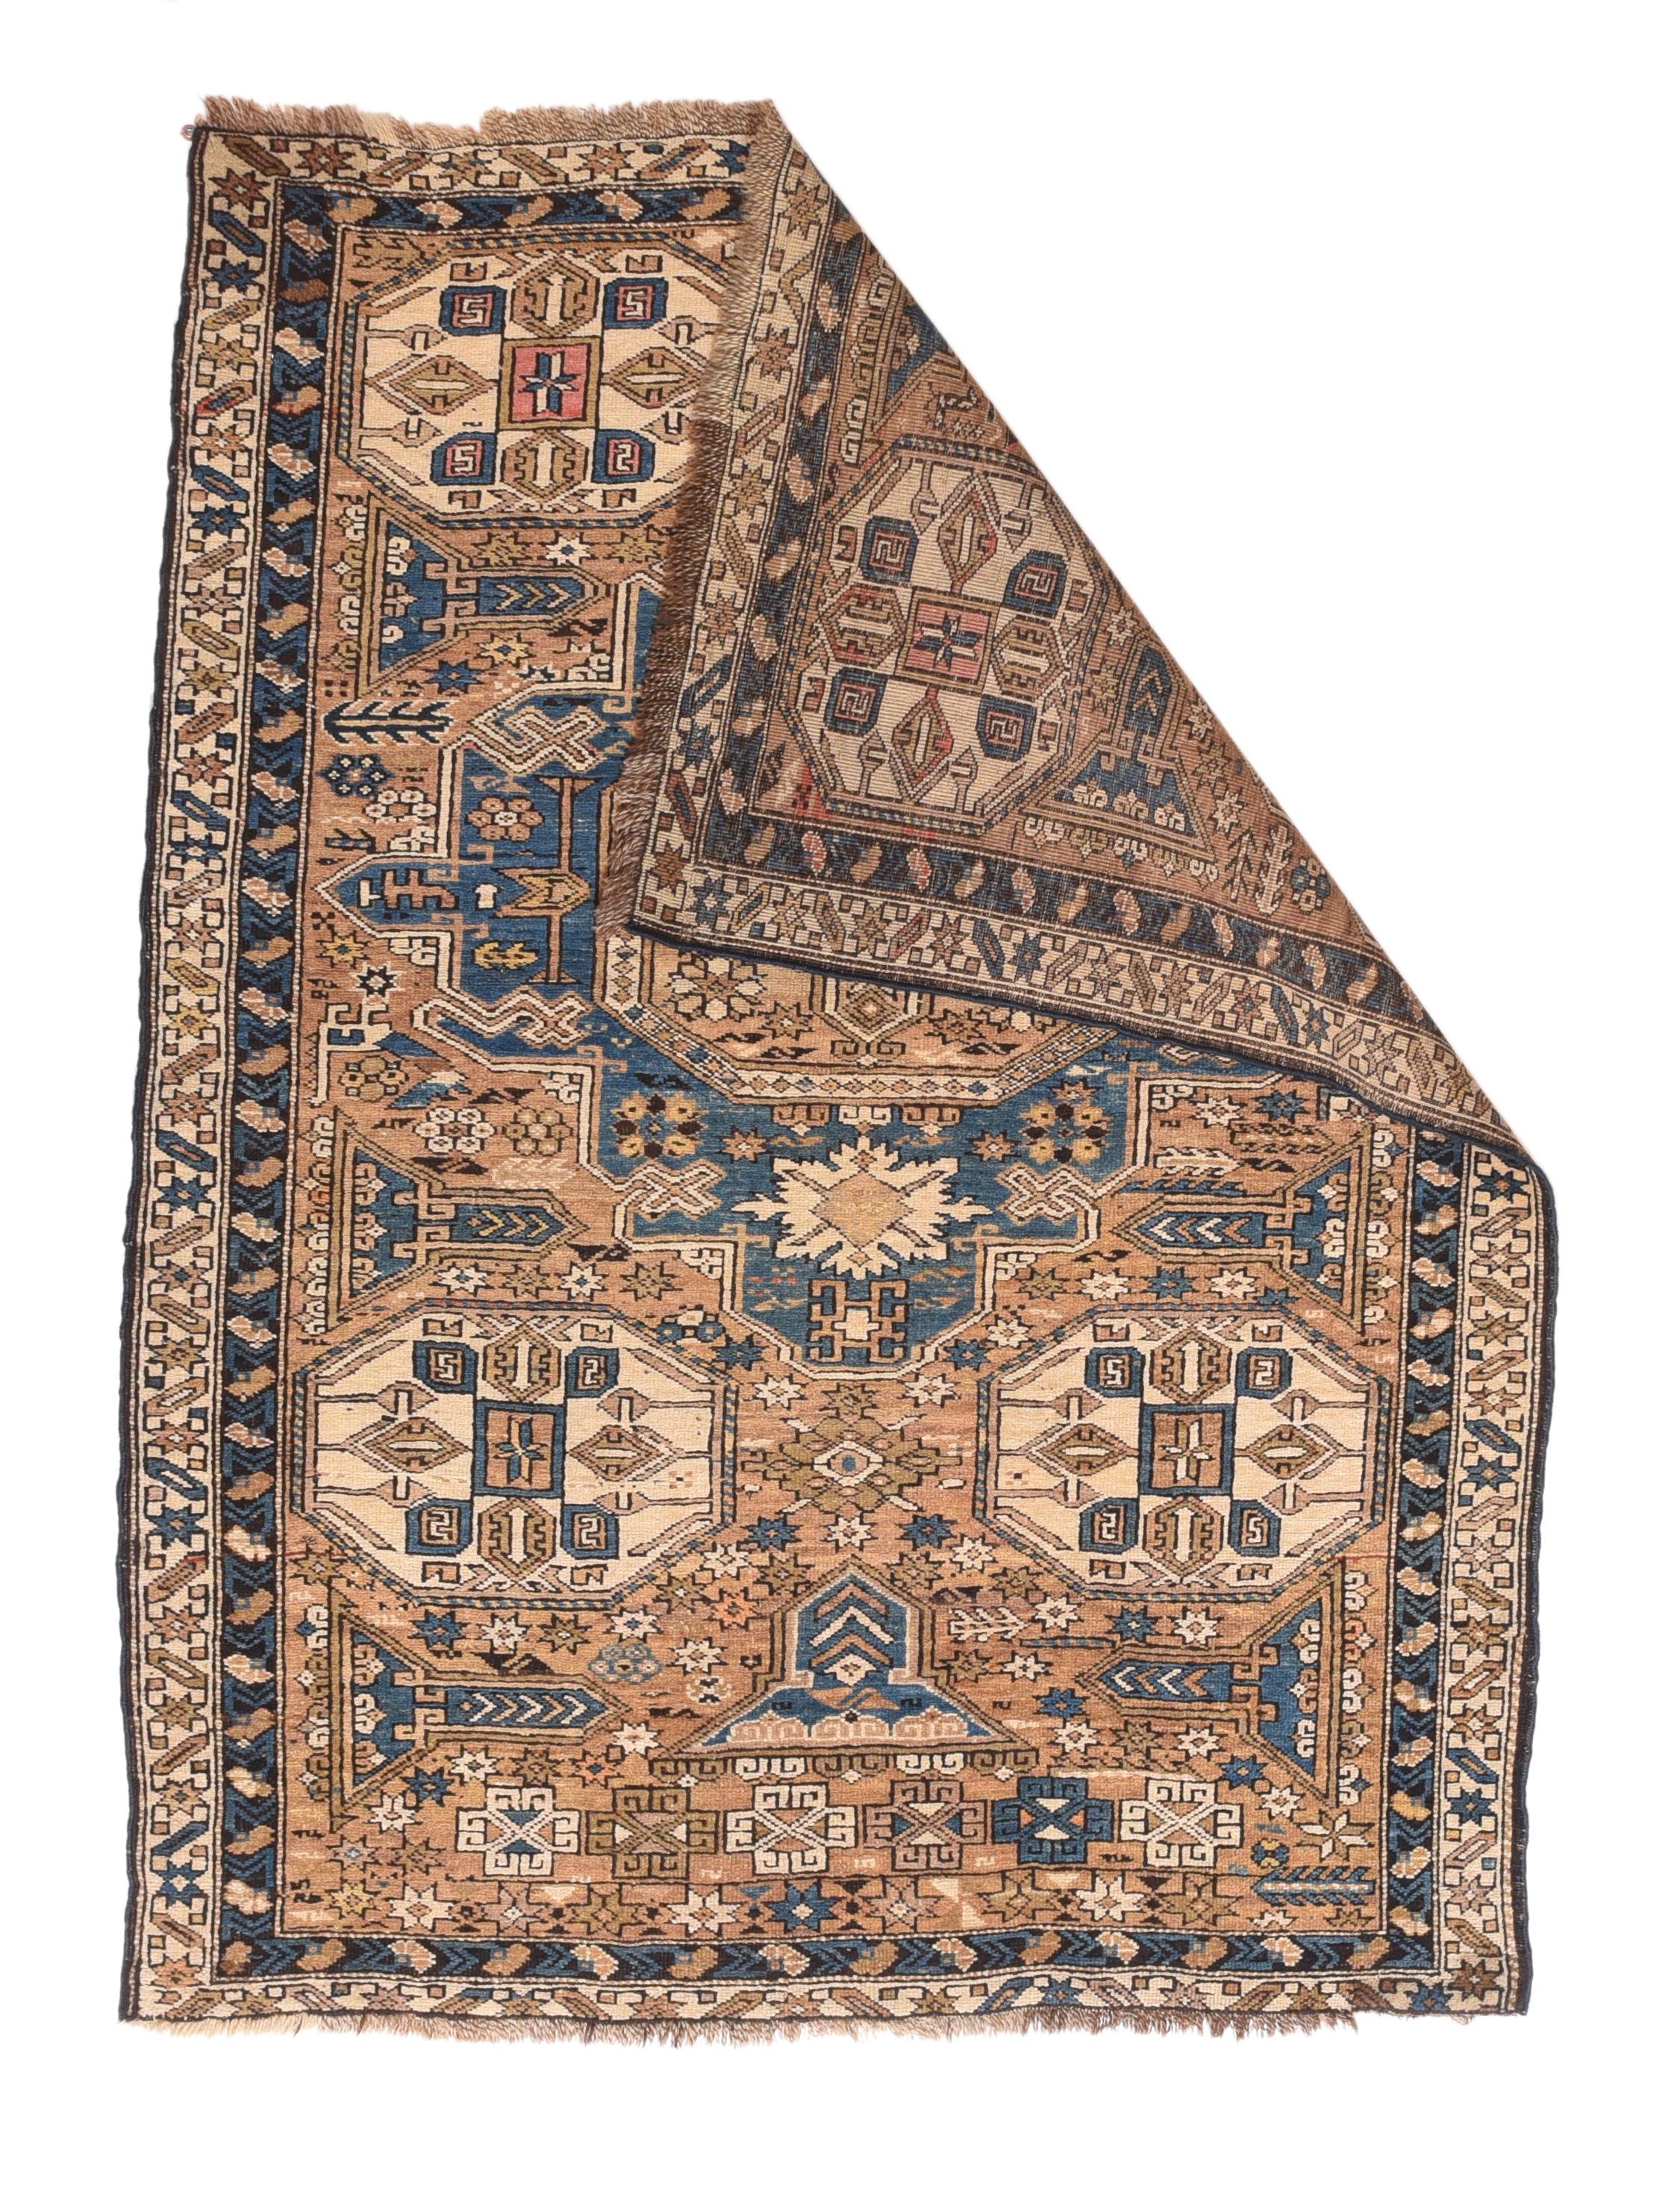 Adapted from a flatwoven Soumak rug design, this east Caucasian scatter shows a single reticulated medium blue faceted cruciform medallion with four pale straw secondary octagons and lateral; “rocket ships” on a dusty rose field. A row of squared